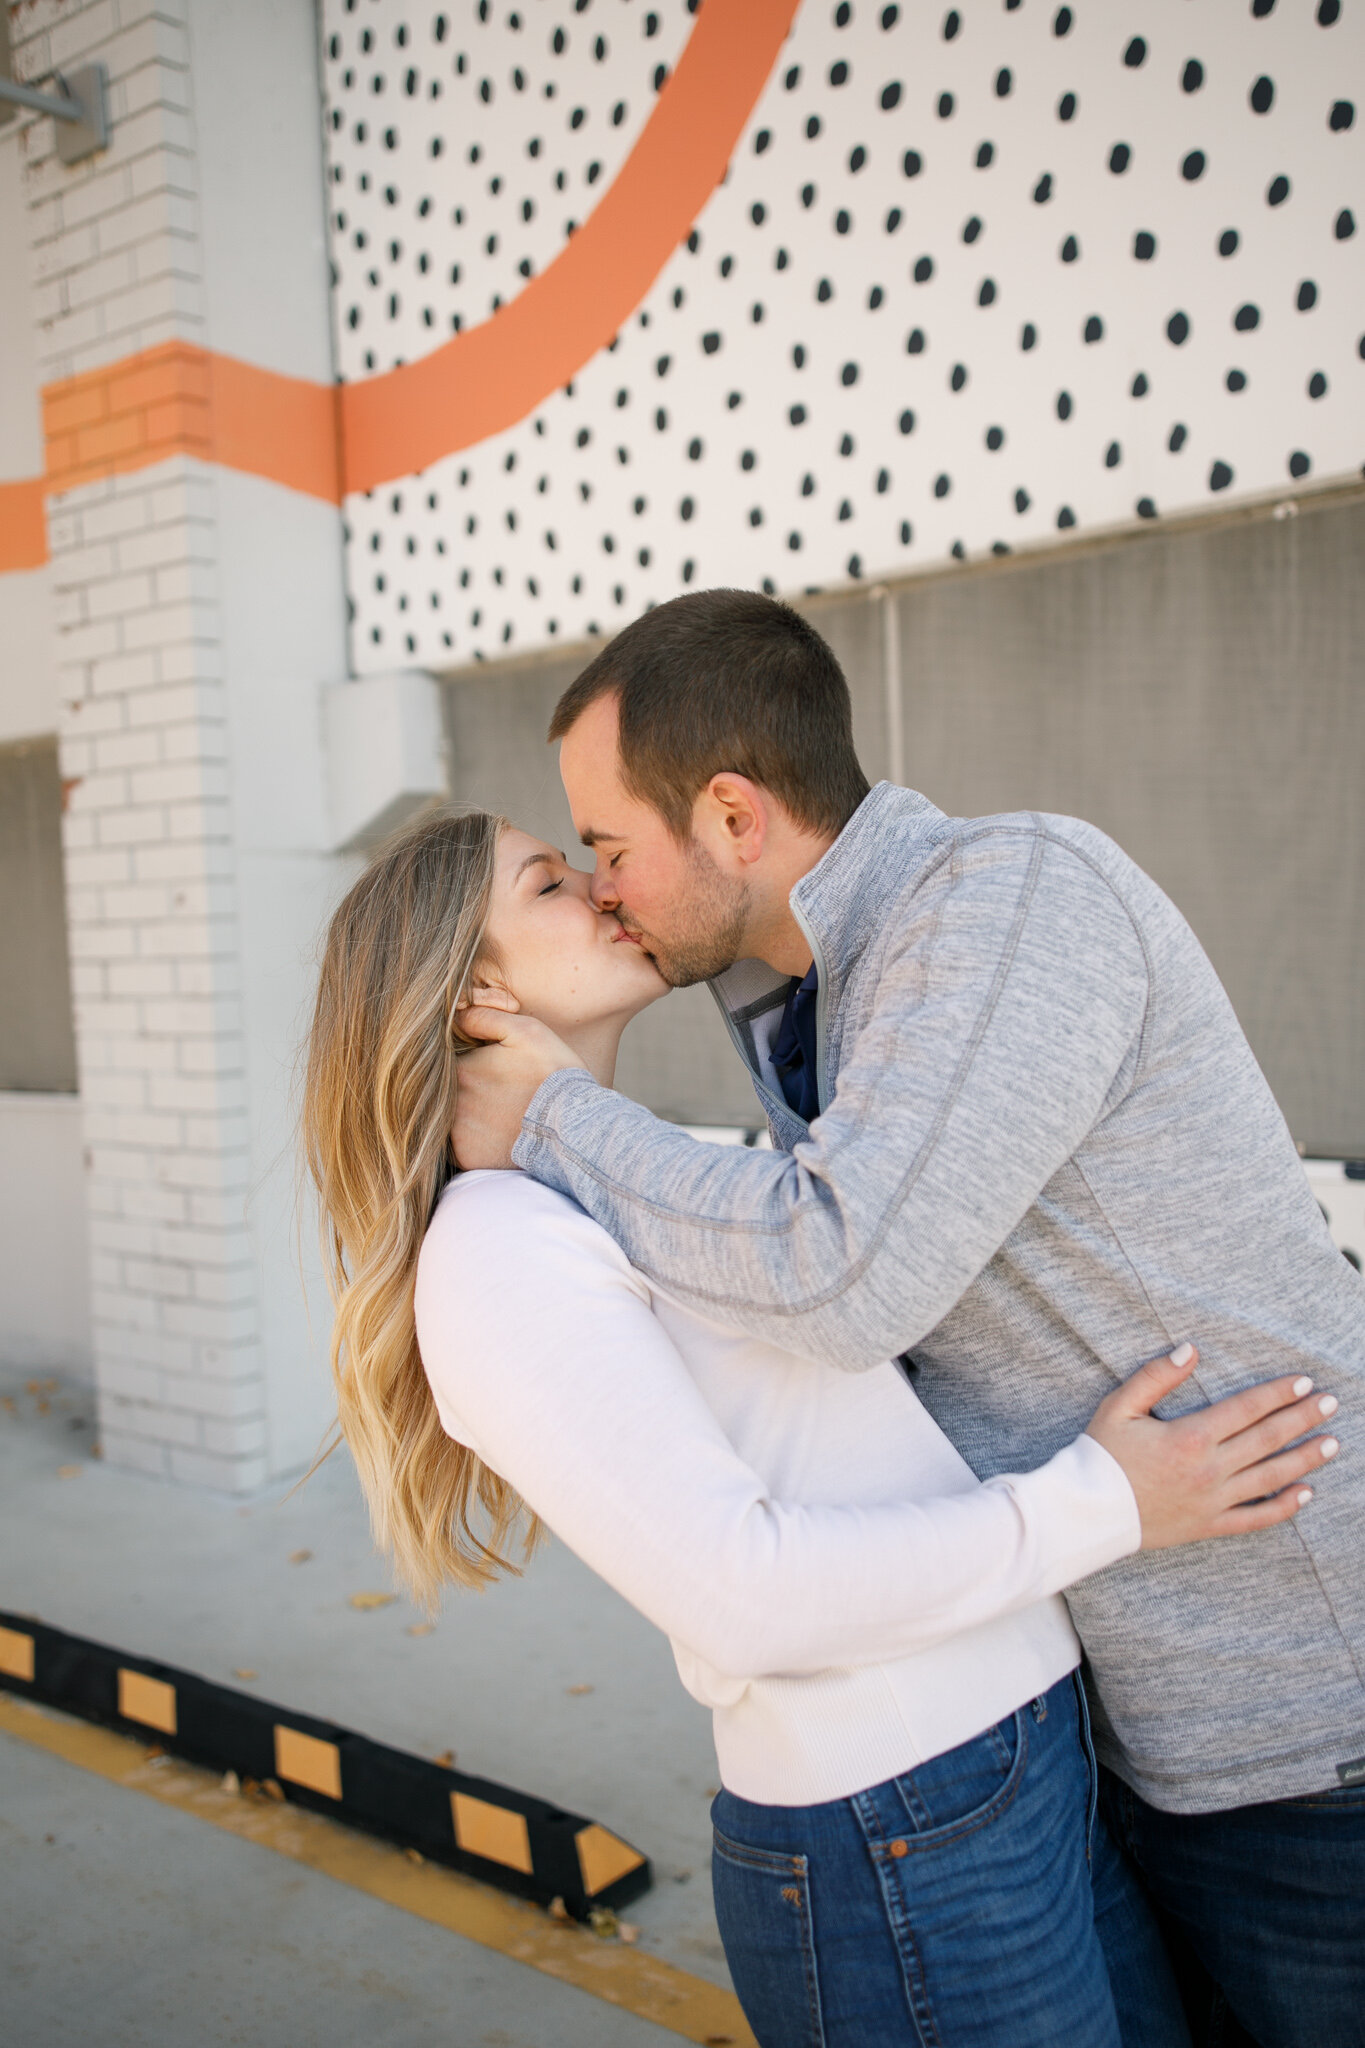 Libby and Alex Engaged Preview 2020 - Grand Rapids Wedding Photographer - J Darling Photo033.jpg